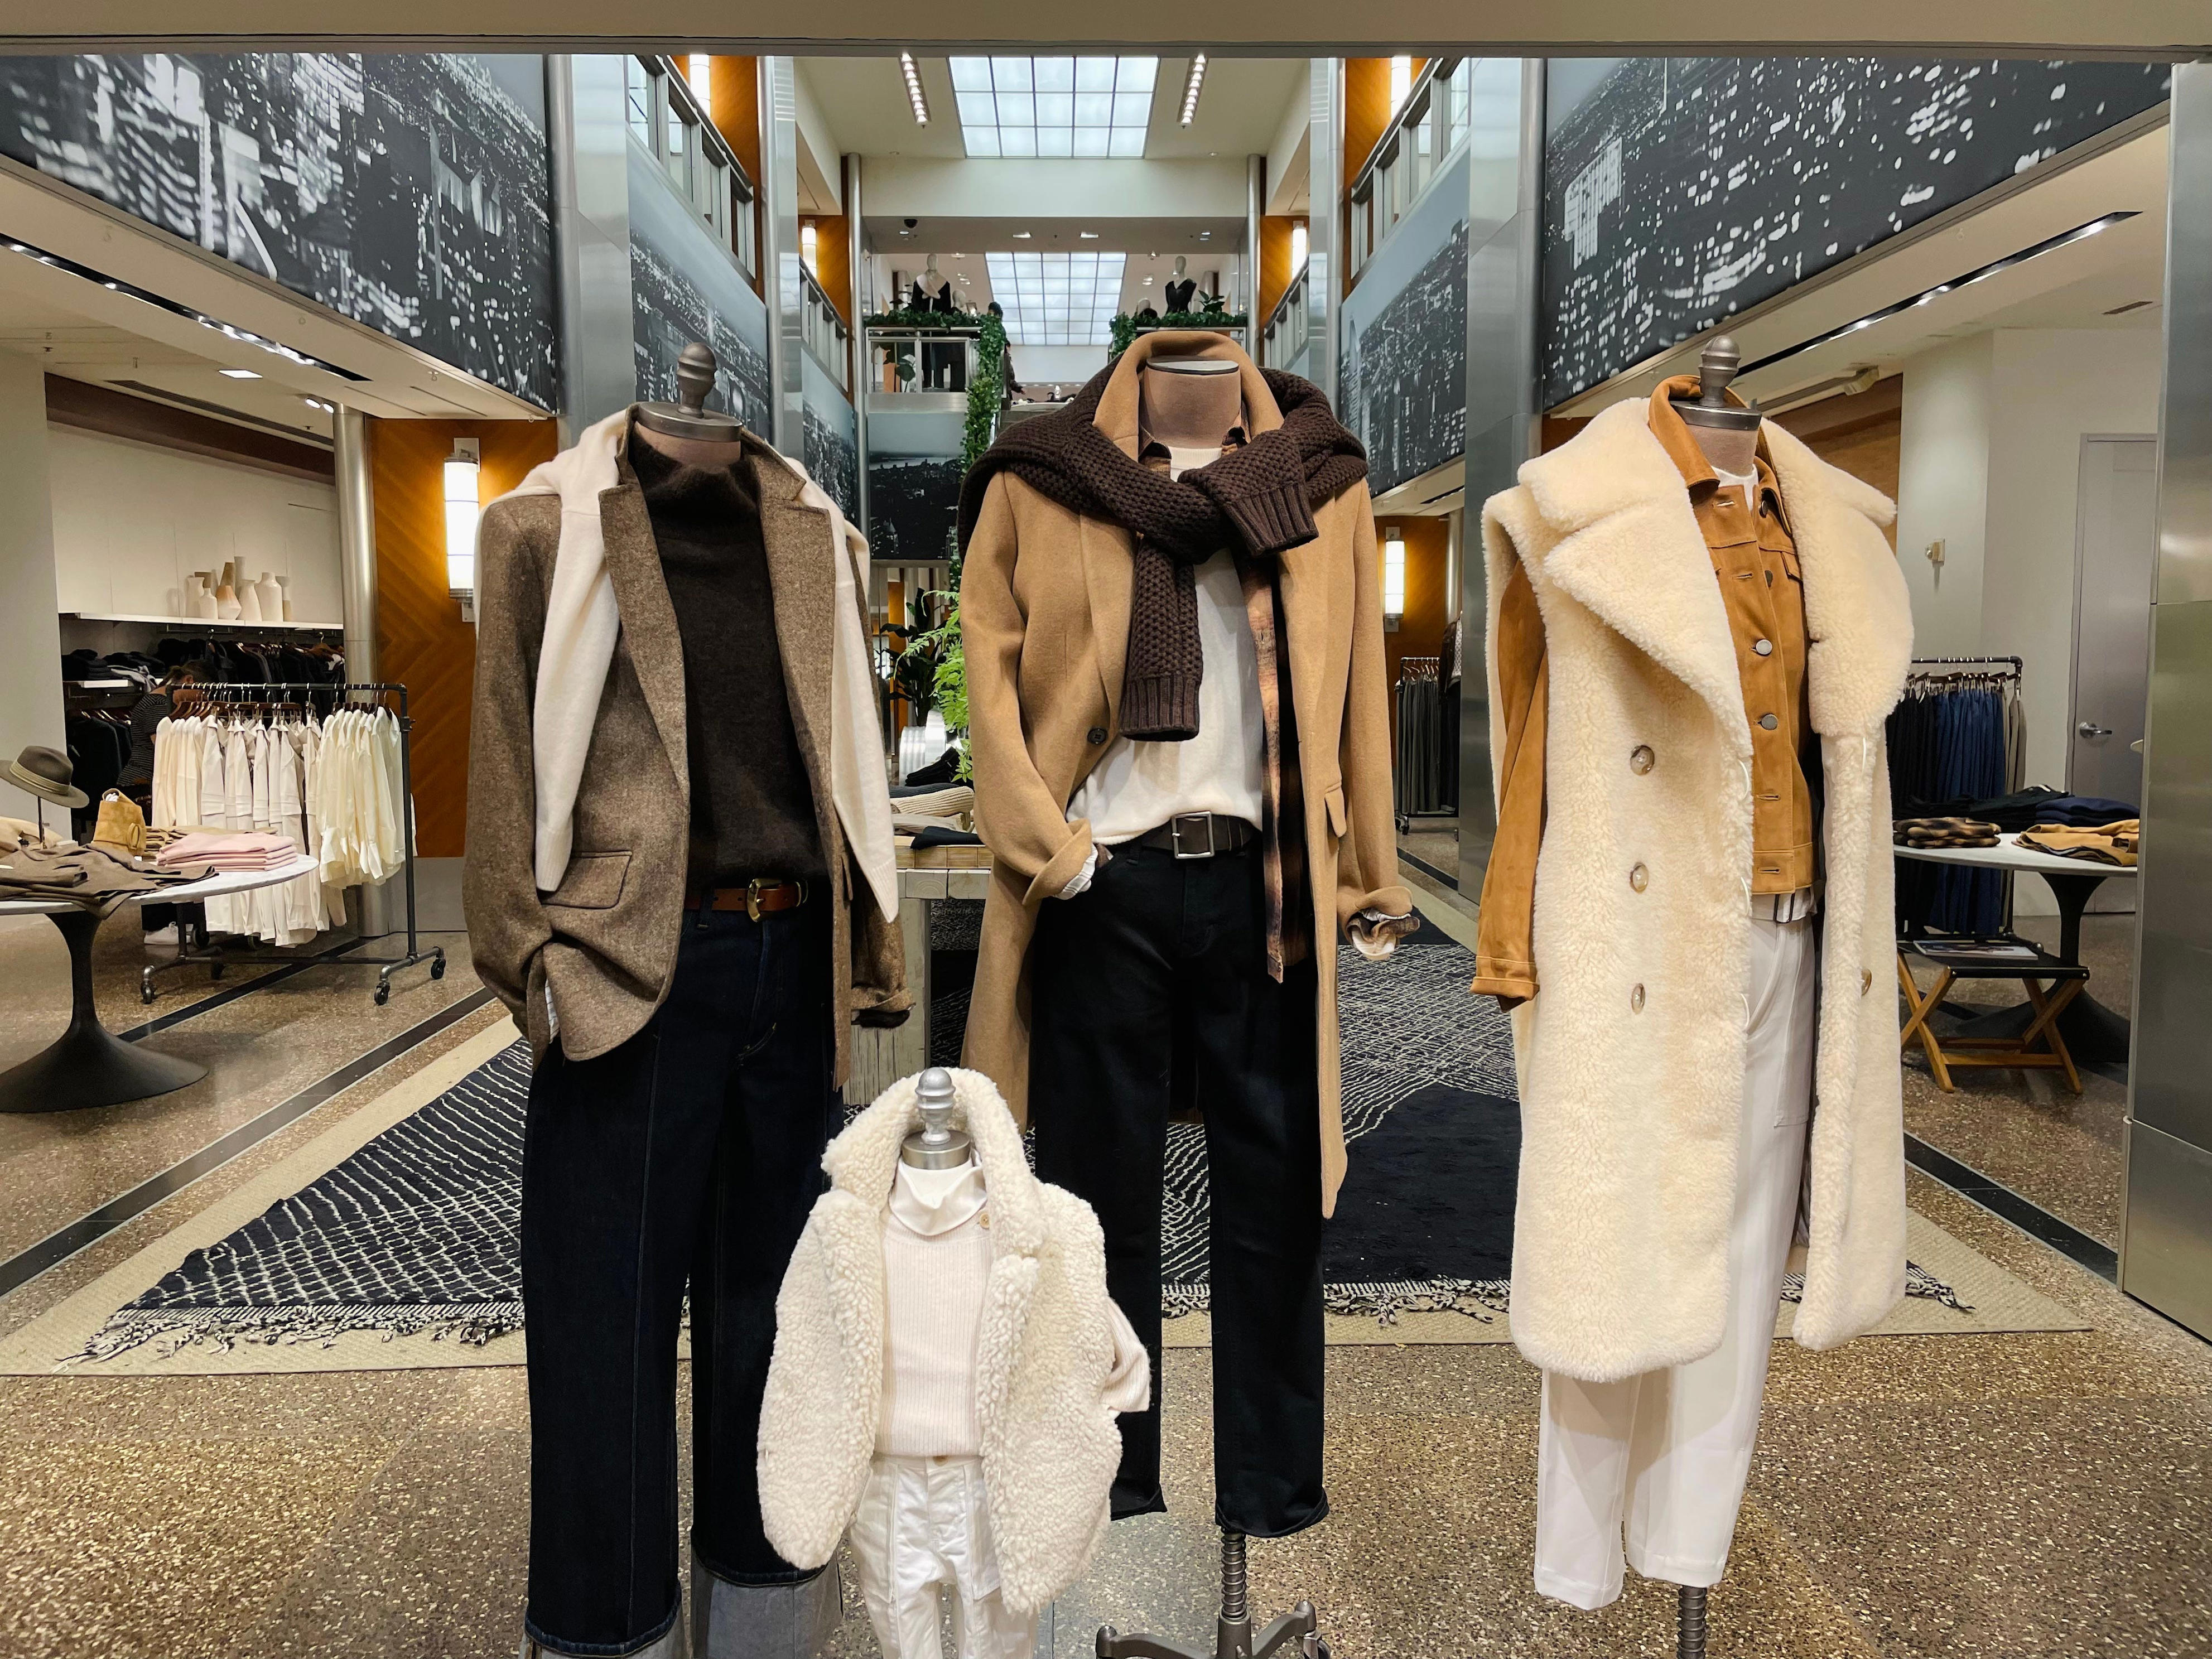 <p>The styling here wasn't super impressive, but definitely spoke to a quiet-luxury approach that spotlights staple pieces and luxury fabrics like wool and shearling.</p>